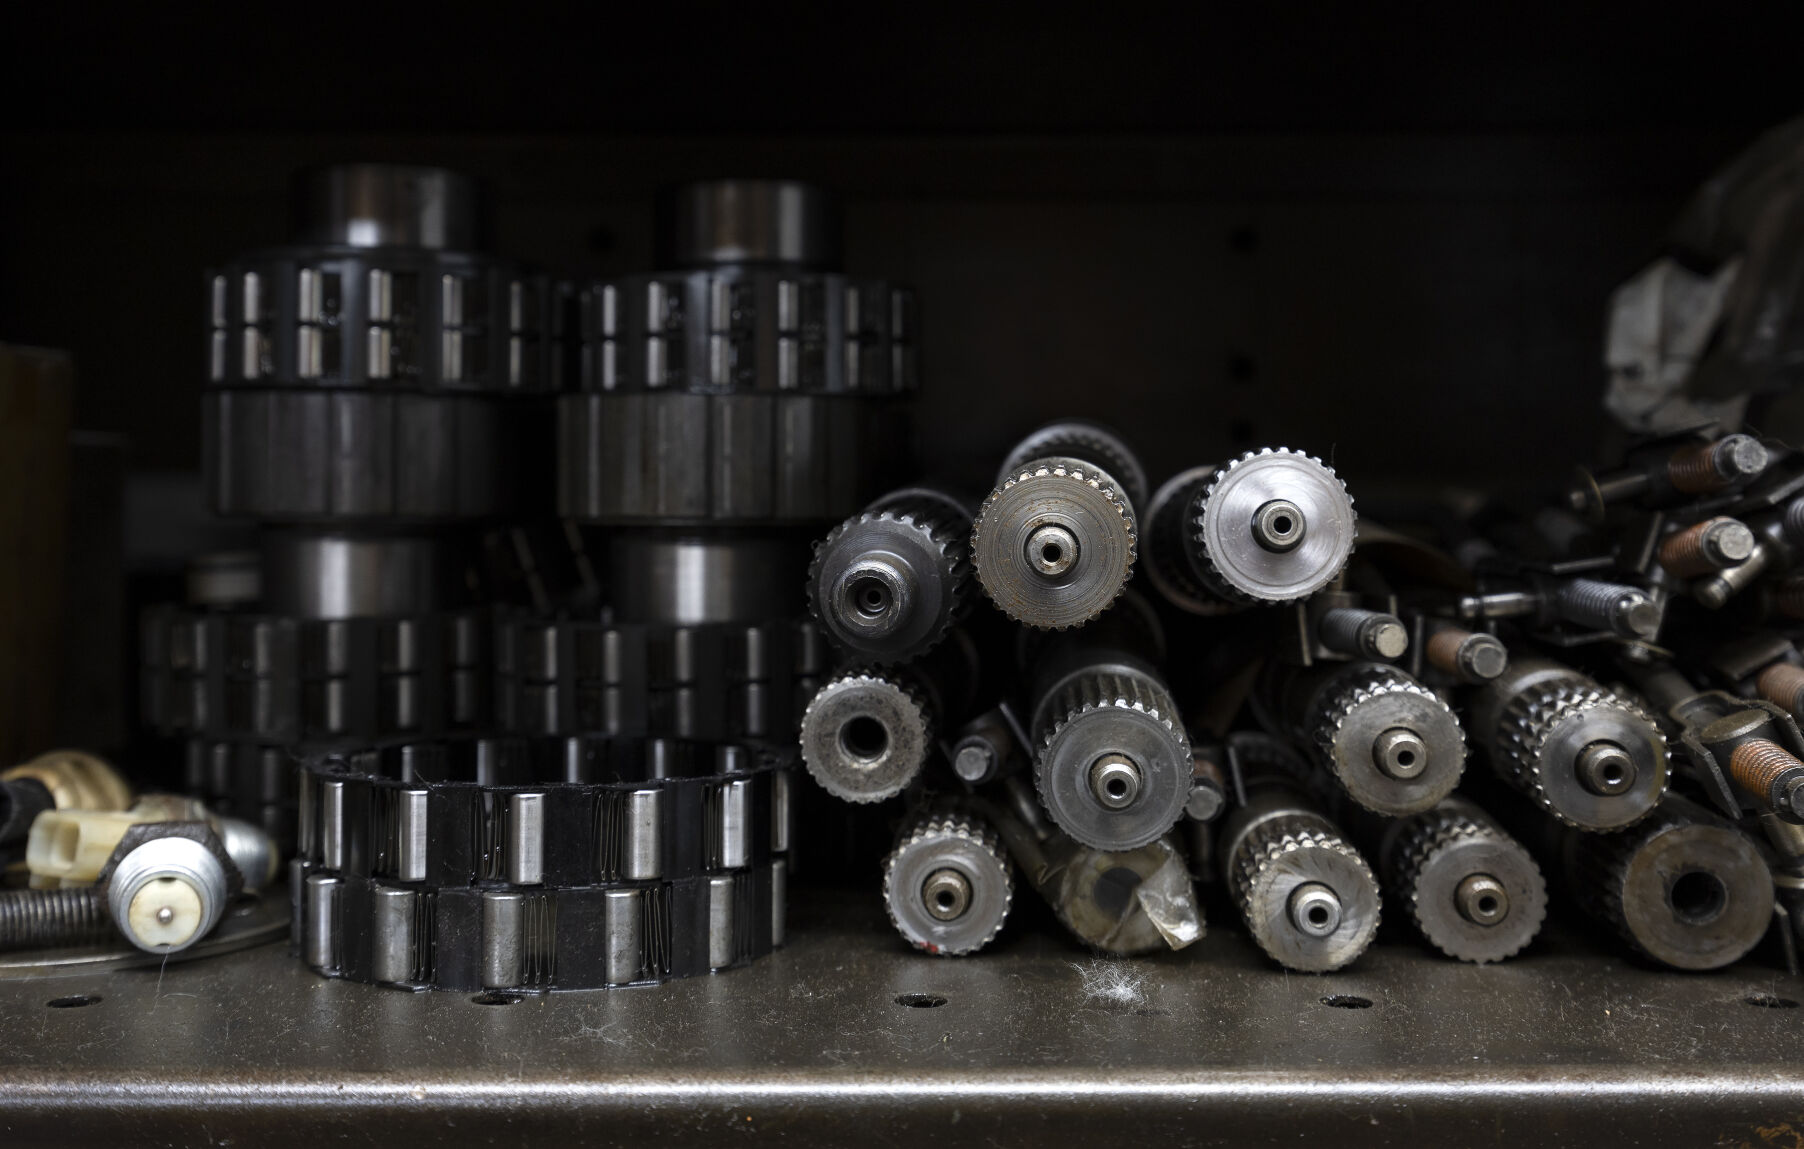 Transmission parts sit on shelves at M-K Matic Transmission Co. on Garfield Avenue in Dubuque on Wednesday, Feb. 15, 2023.    PHOTO CREDIT: Gassman